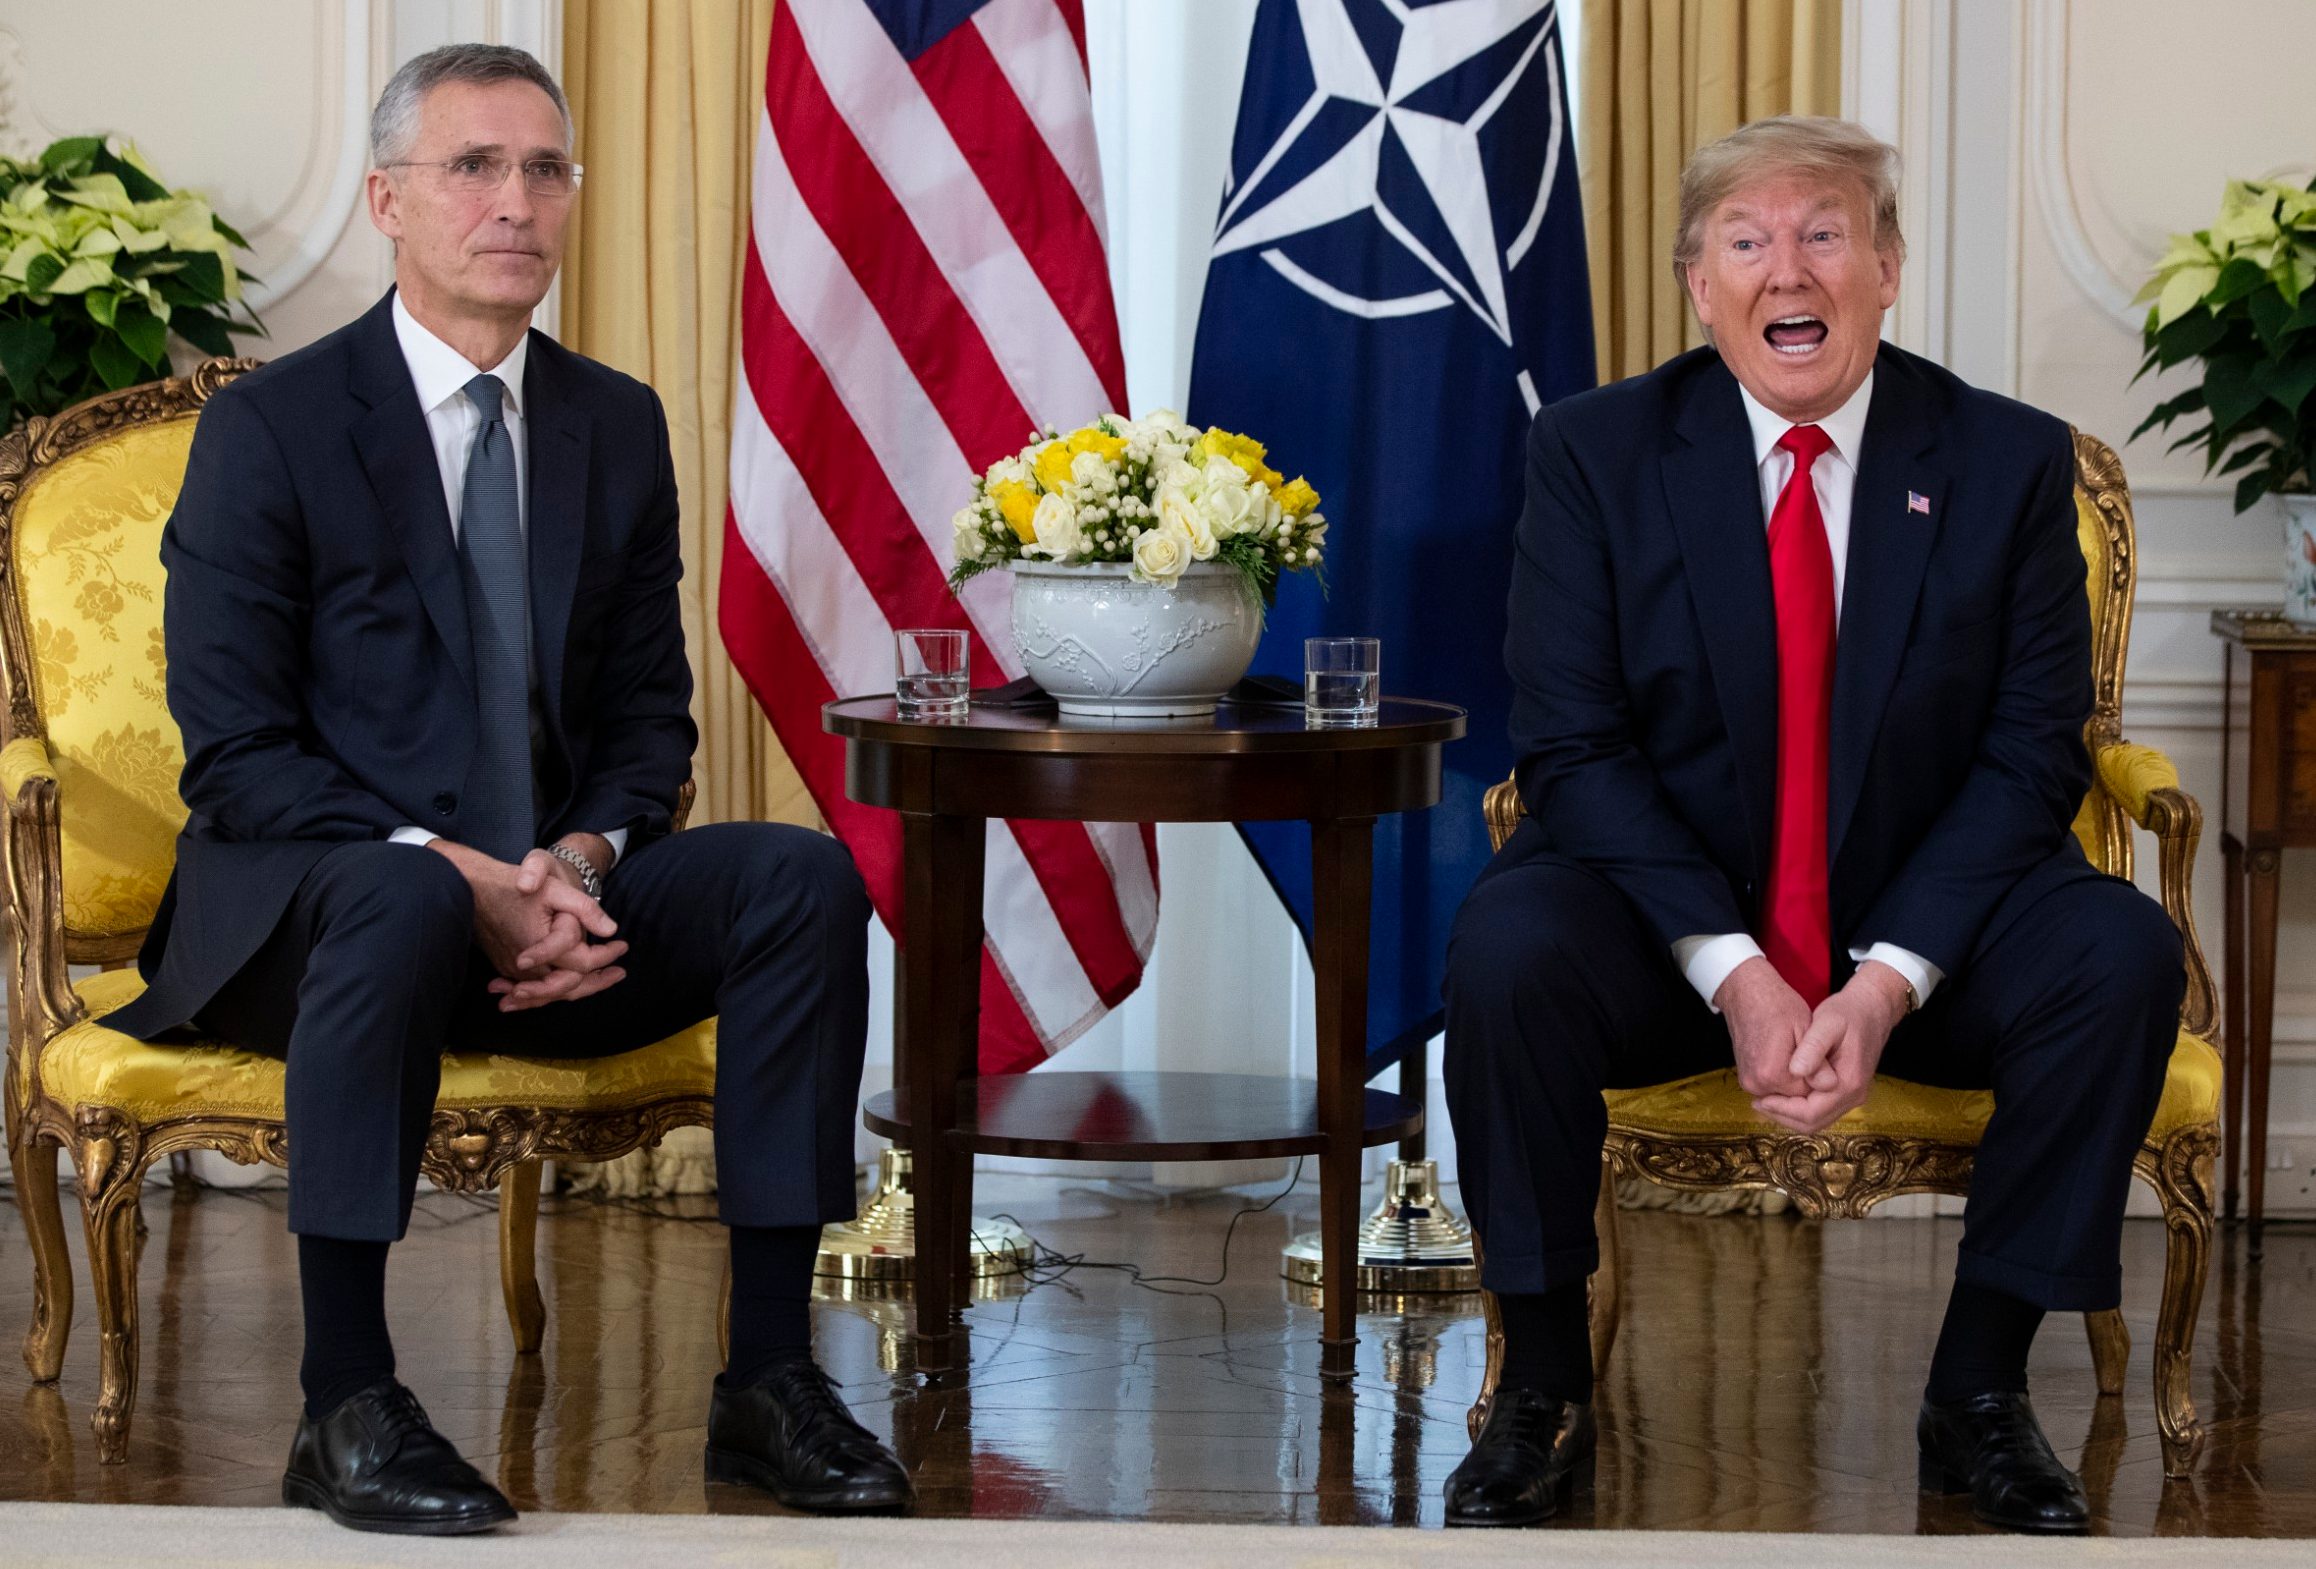 ‘1945 in reverse’: what will happen if the us turns its back on nato